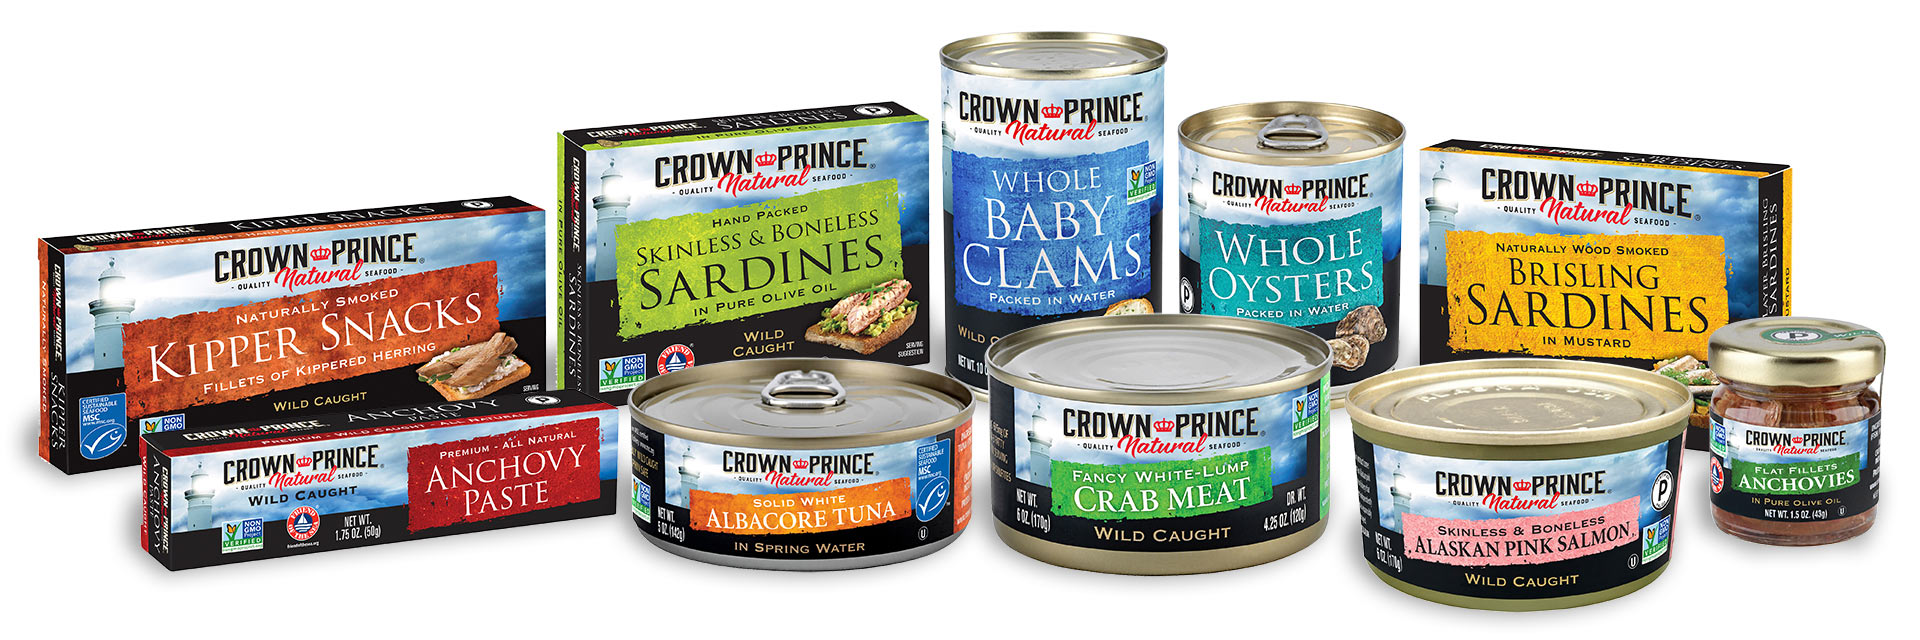 Crown Prince Natural Products